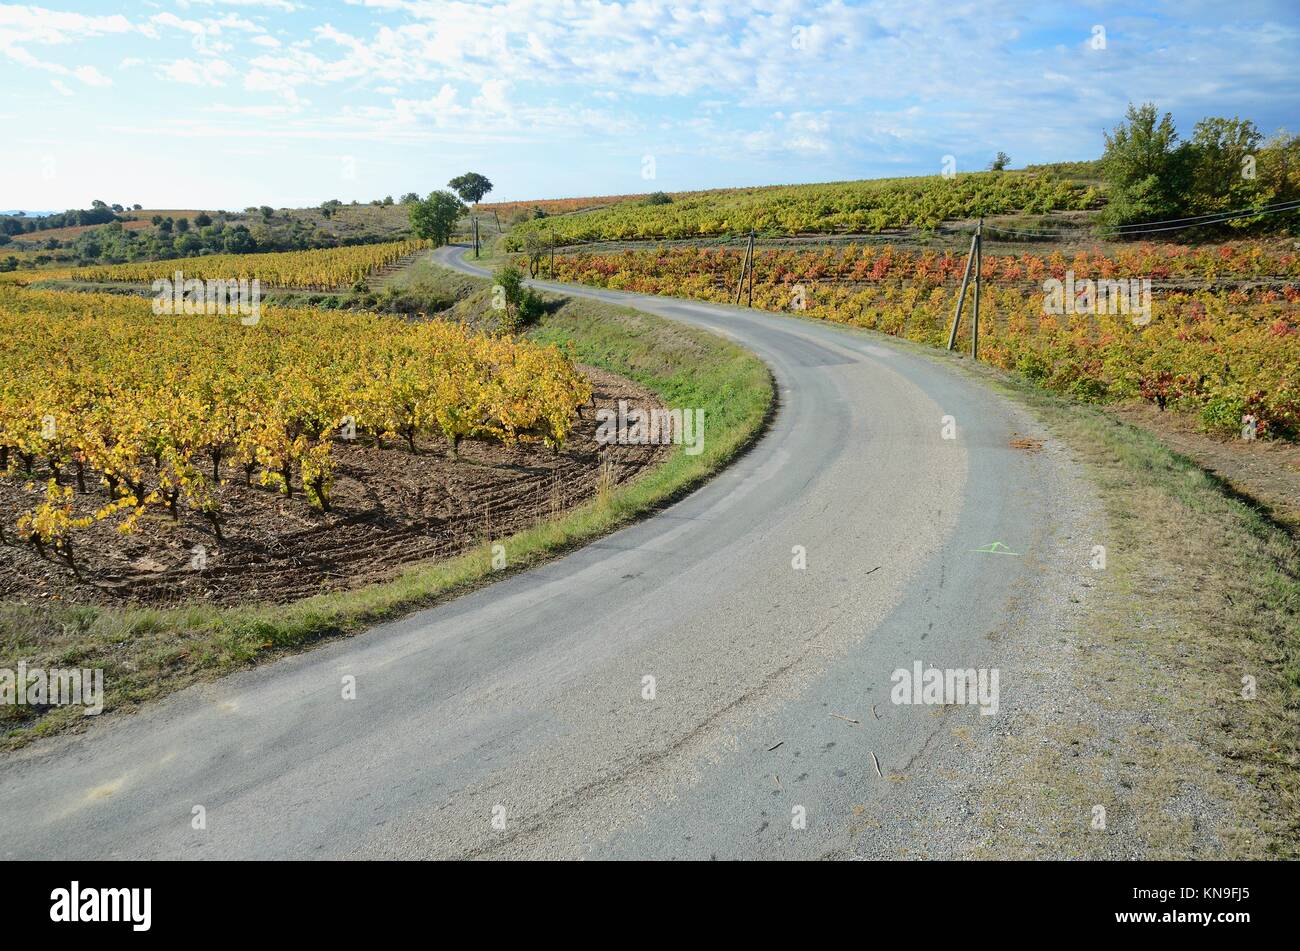 Road by vineyards with fall foliage, AOC Faugeres, Herault, France, Europe. Stock Photo